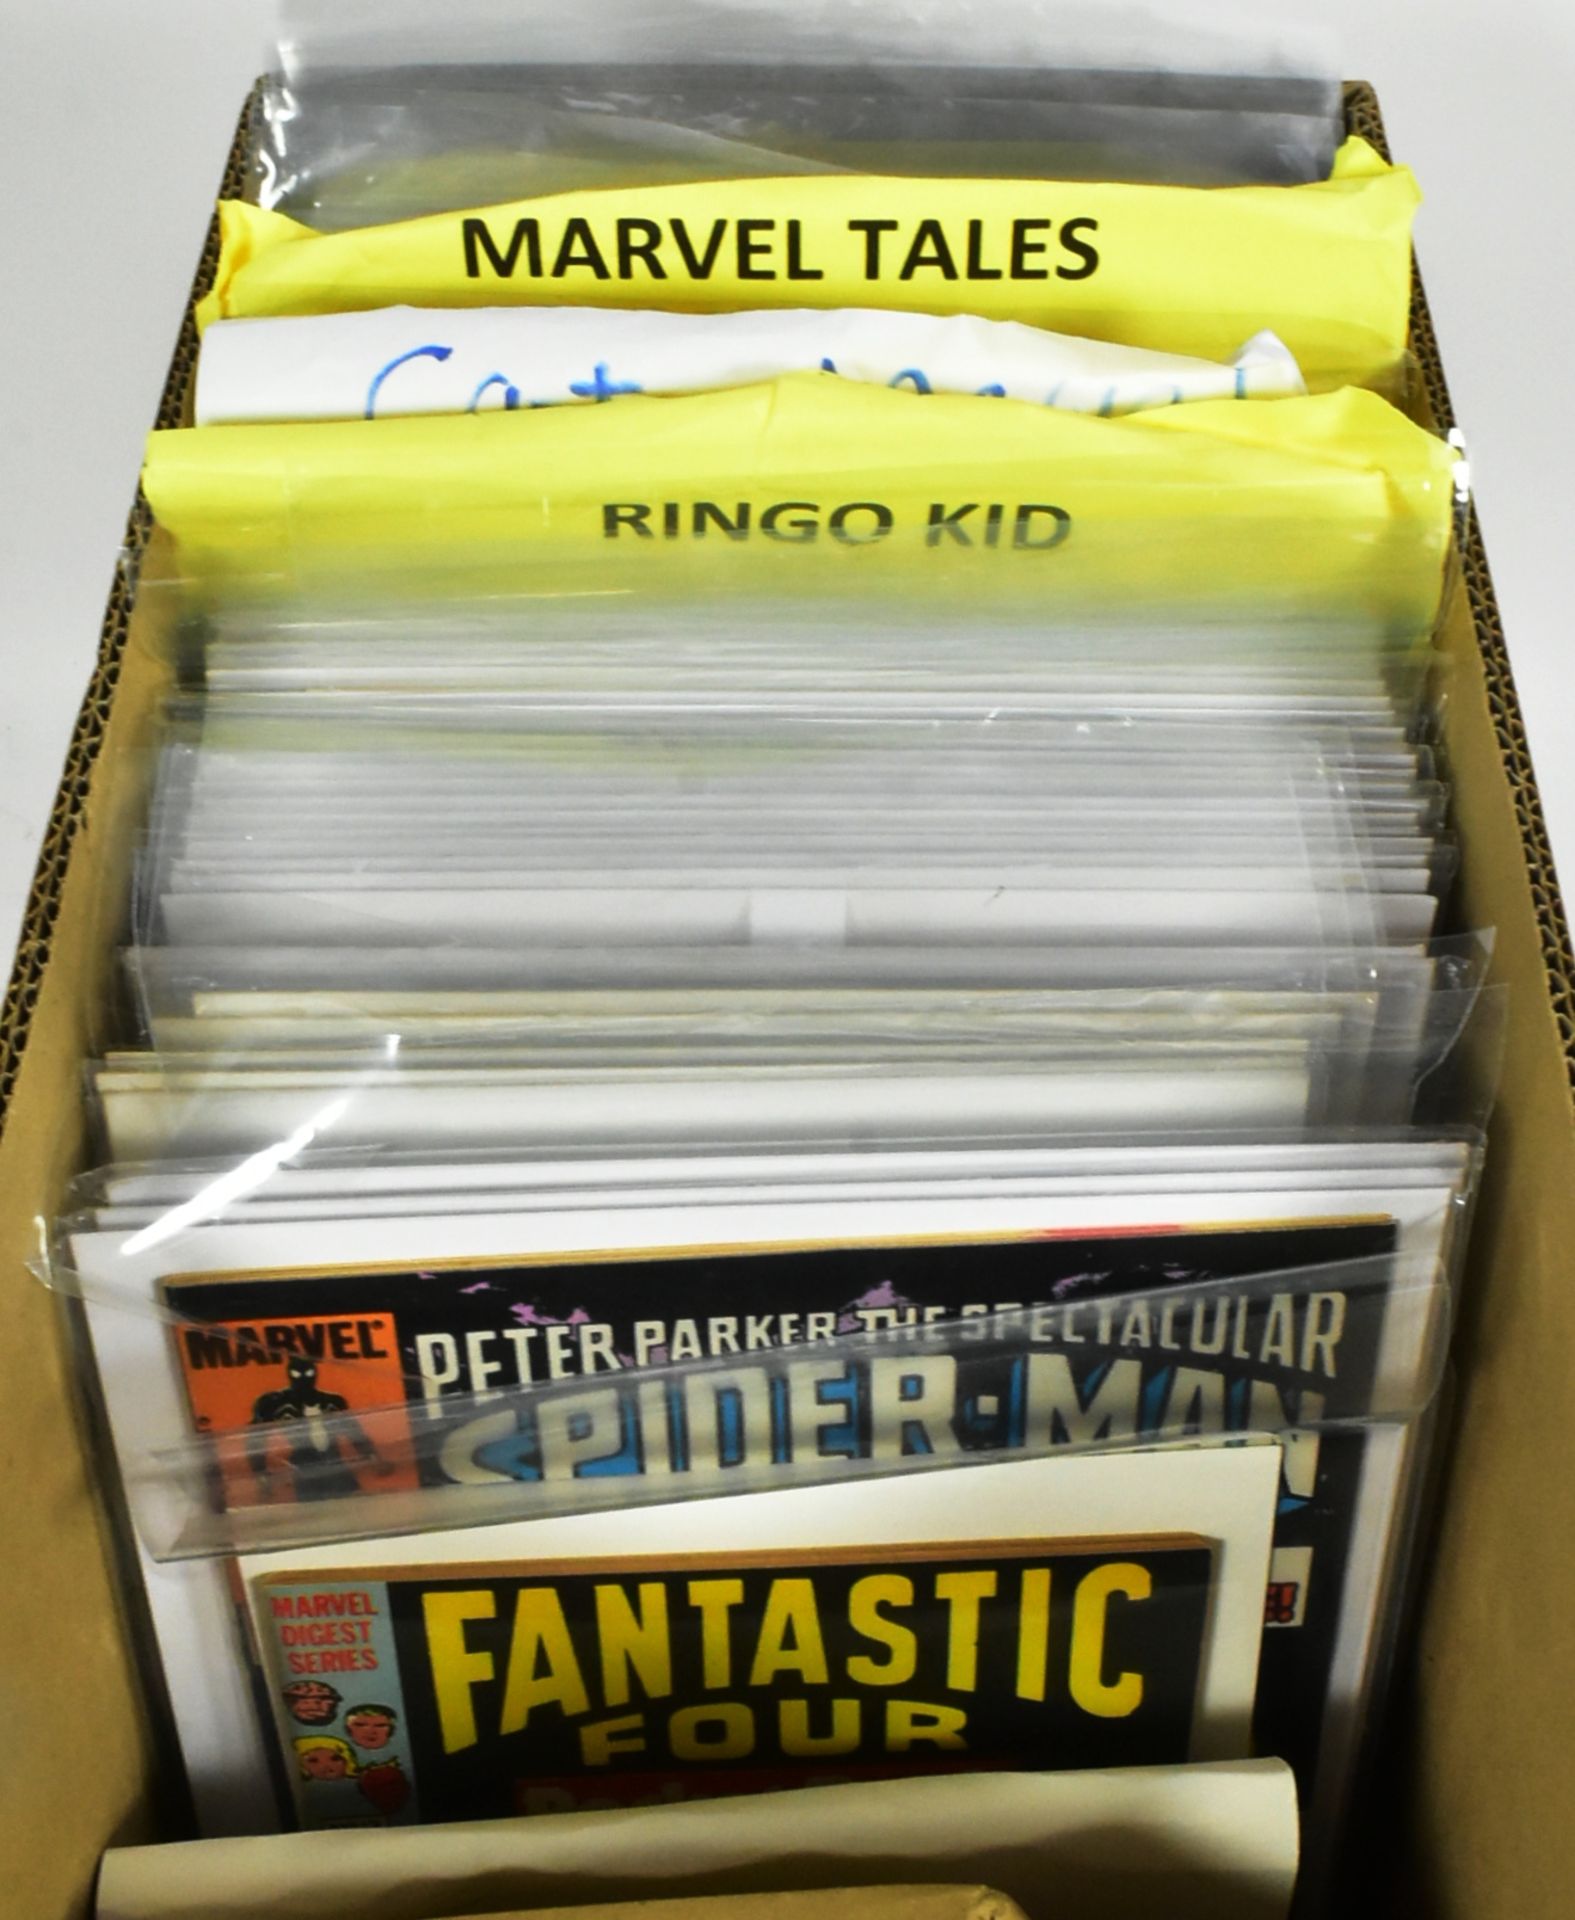 COMICS - COLLECTION OF VINTAGE MARVEL COMIC BOOKS - Image 4 of 4